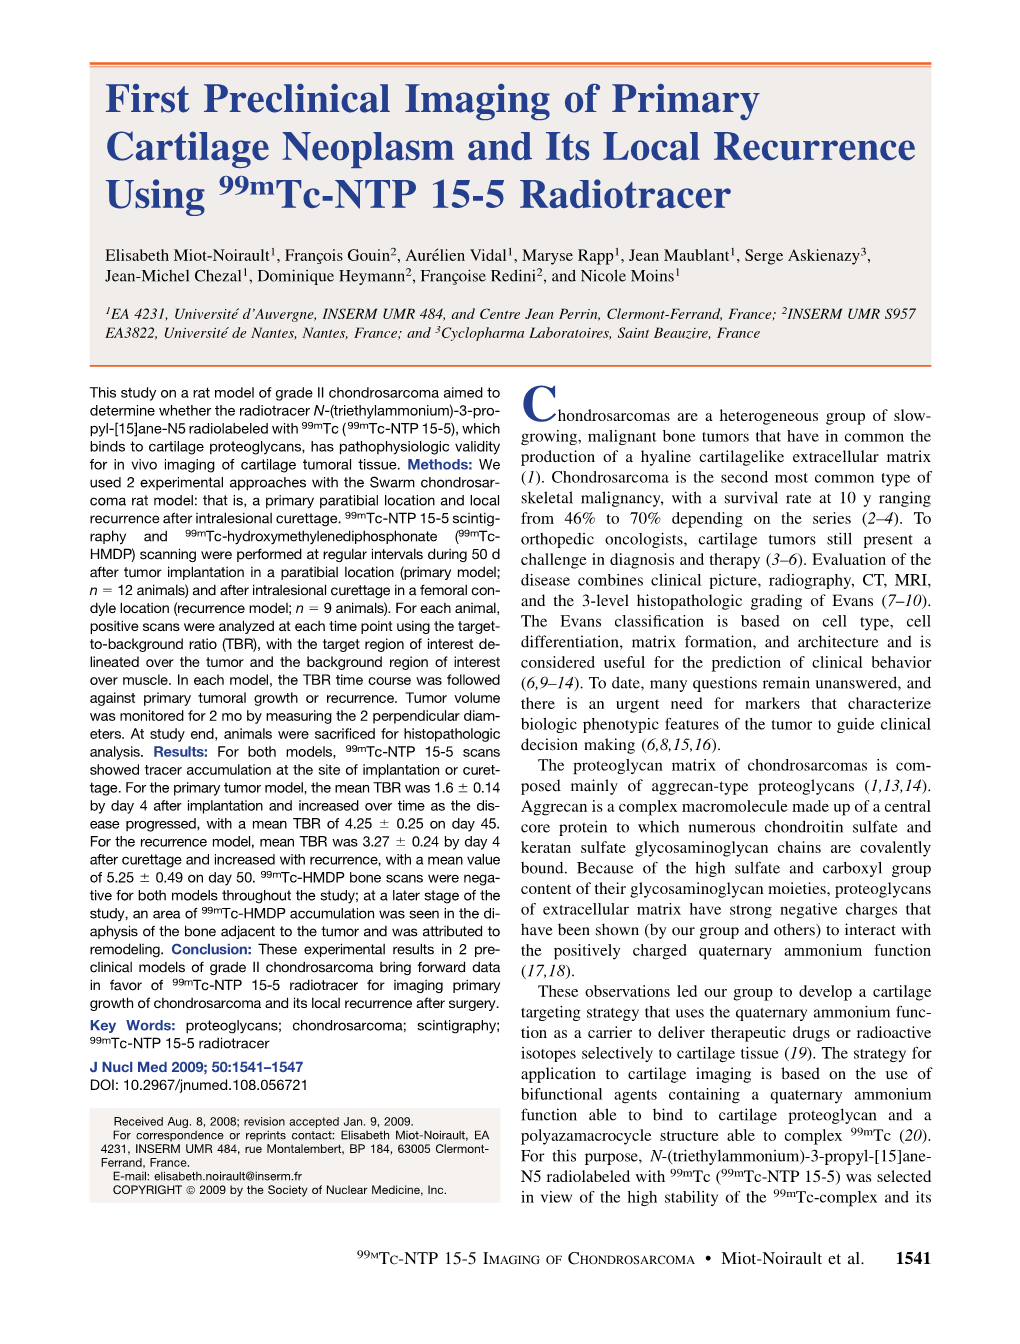 First Preclinical Imaging of Primary Cartilage Neoplasm and Its Local Recurrence Using 99Mtc-NTP 15-5 Radiotracer